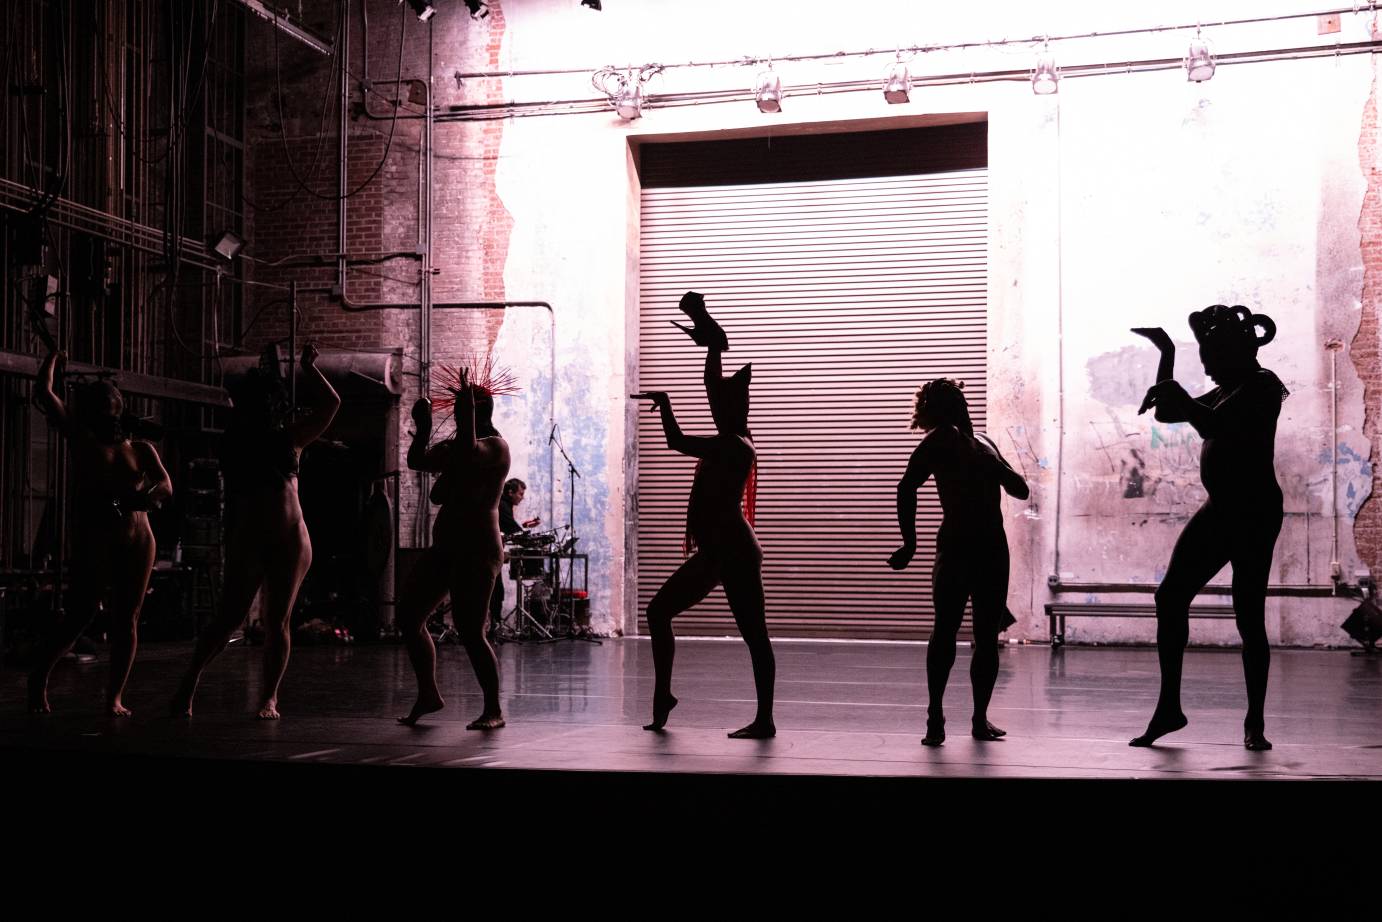 dancers in single line, silhouette, in various poses